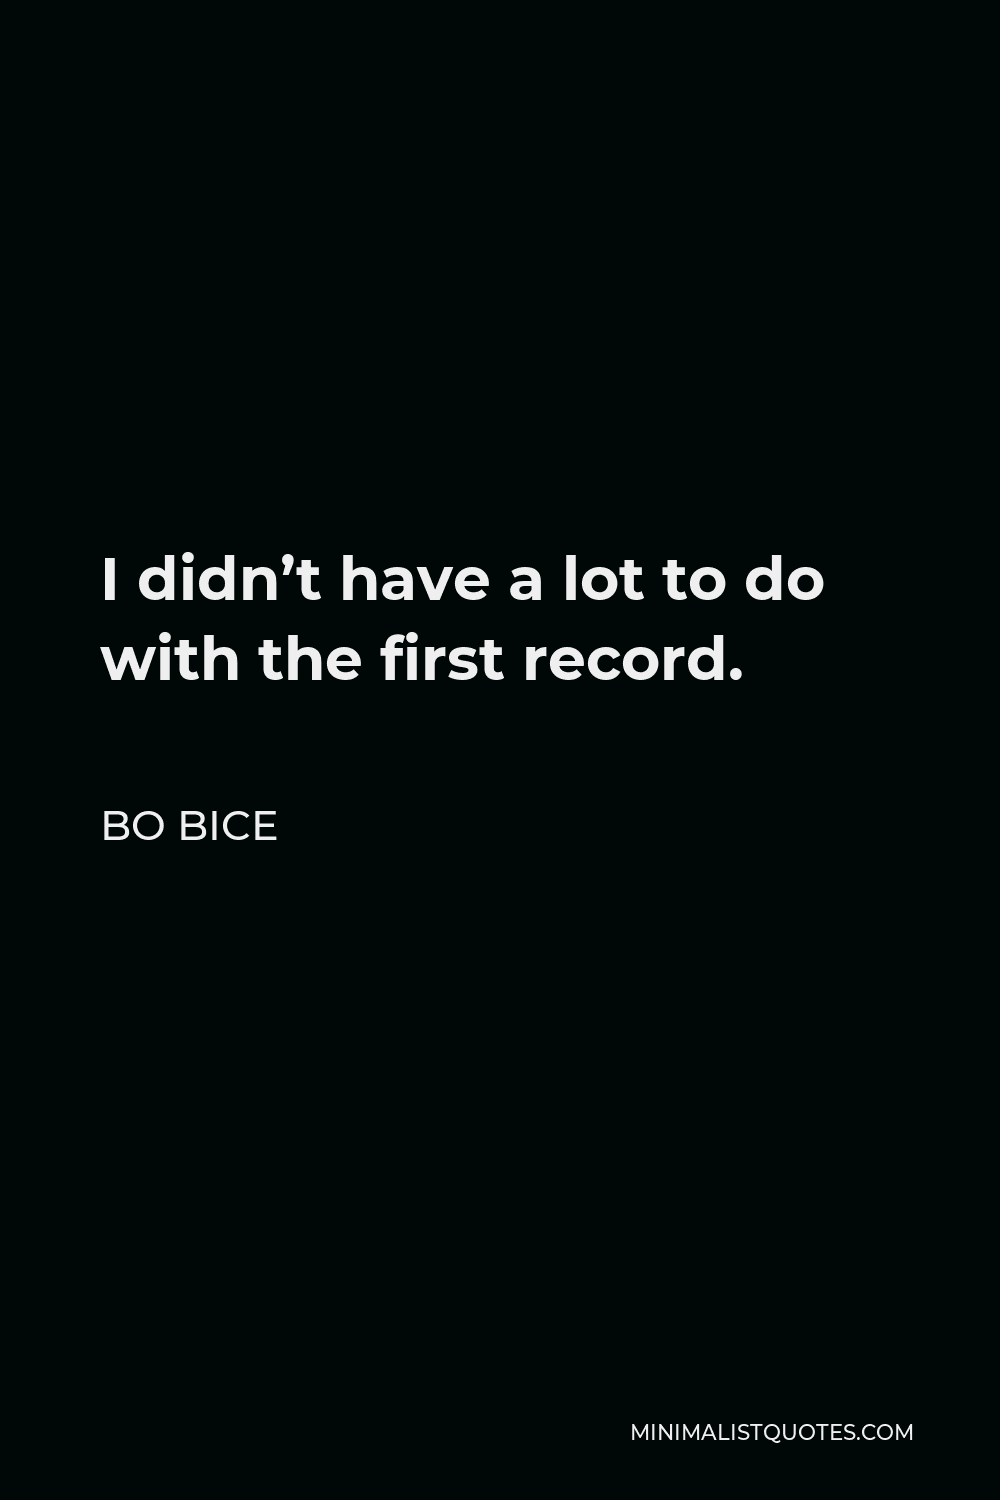 Bo Bice Quote - I didn’t have a lot to do with the first record.